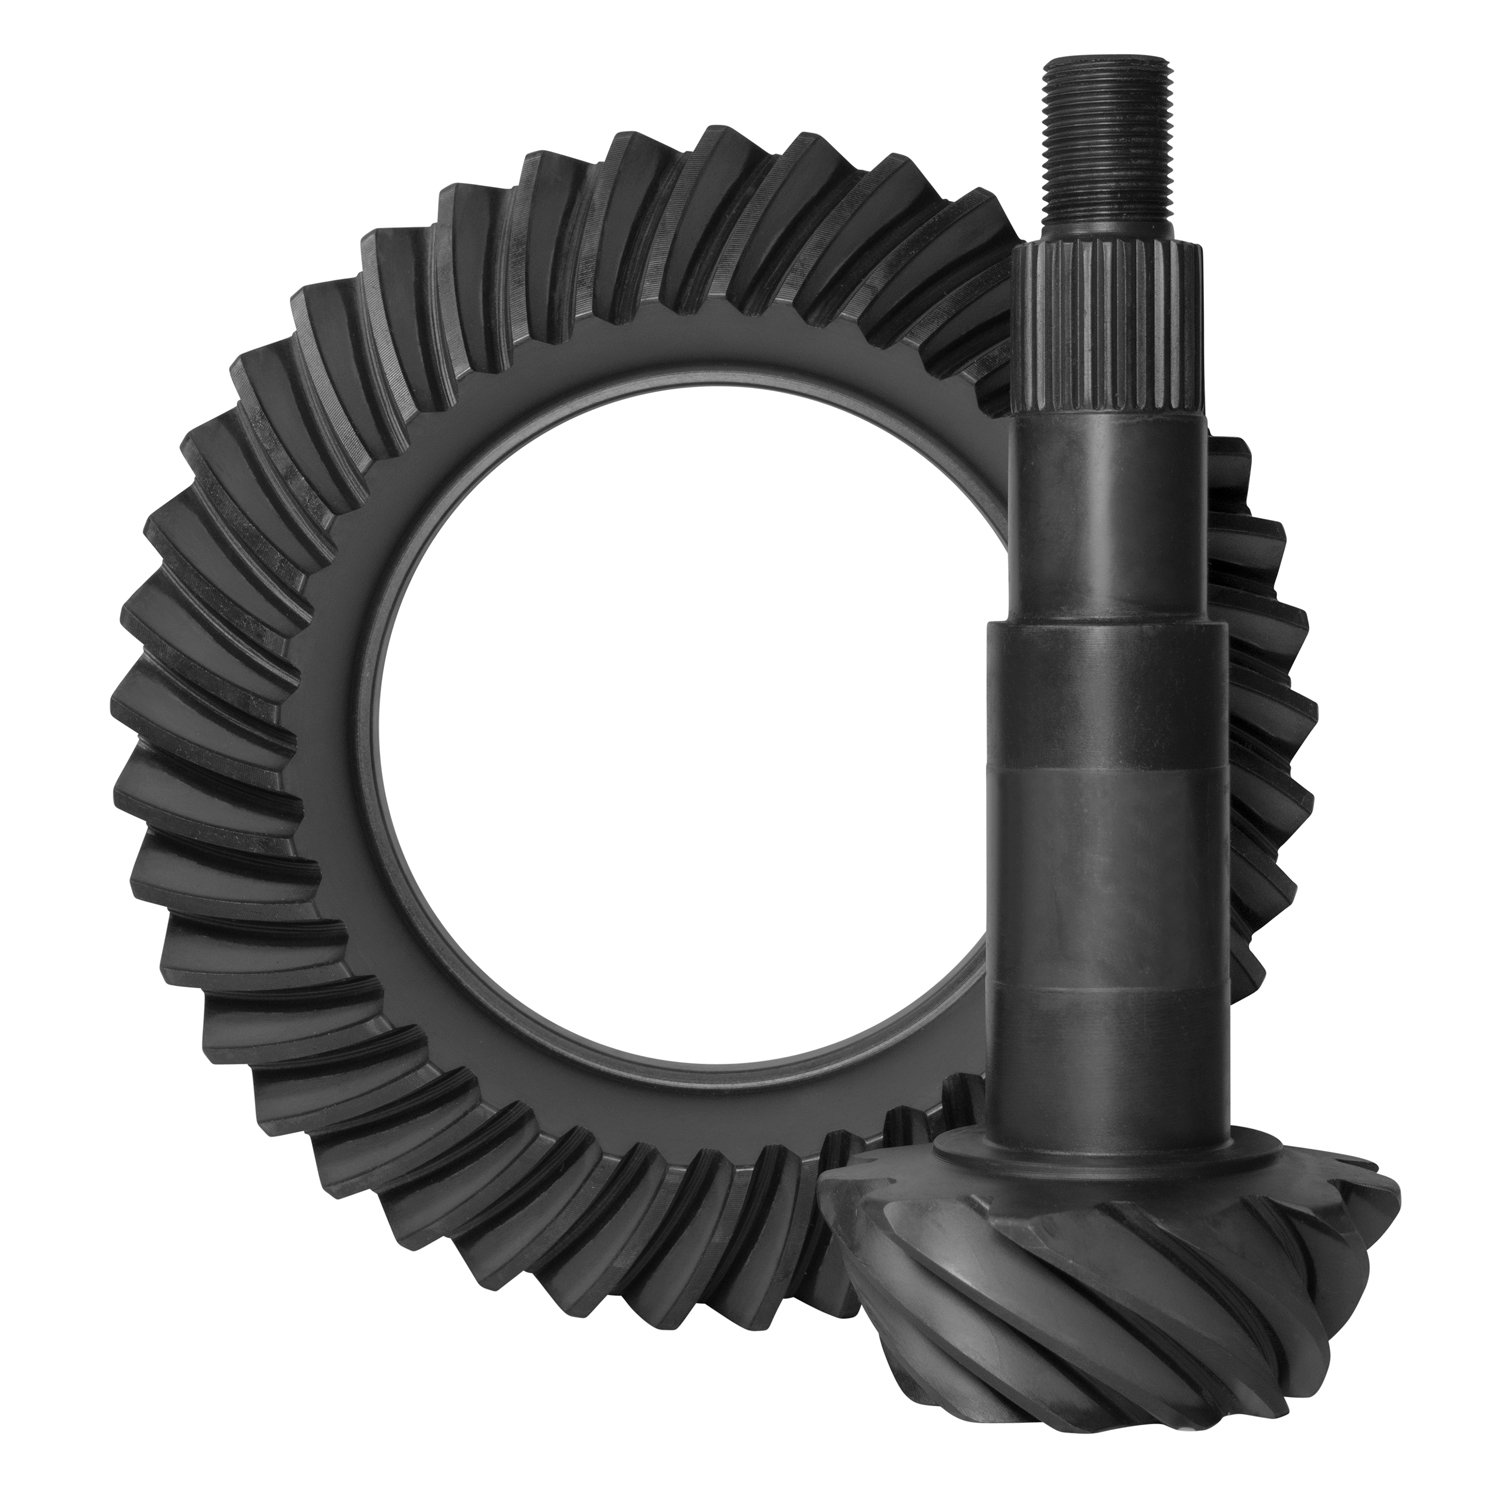 USA Standard ZG GM8.5-488 Ring & Pinion Gear Set, For GM 8.5 in., 4.88 Ratio